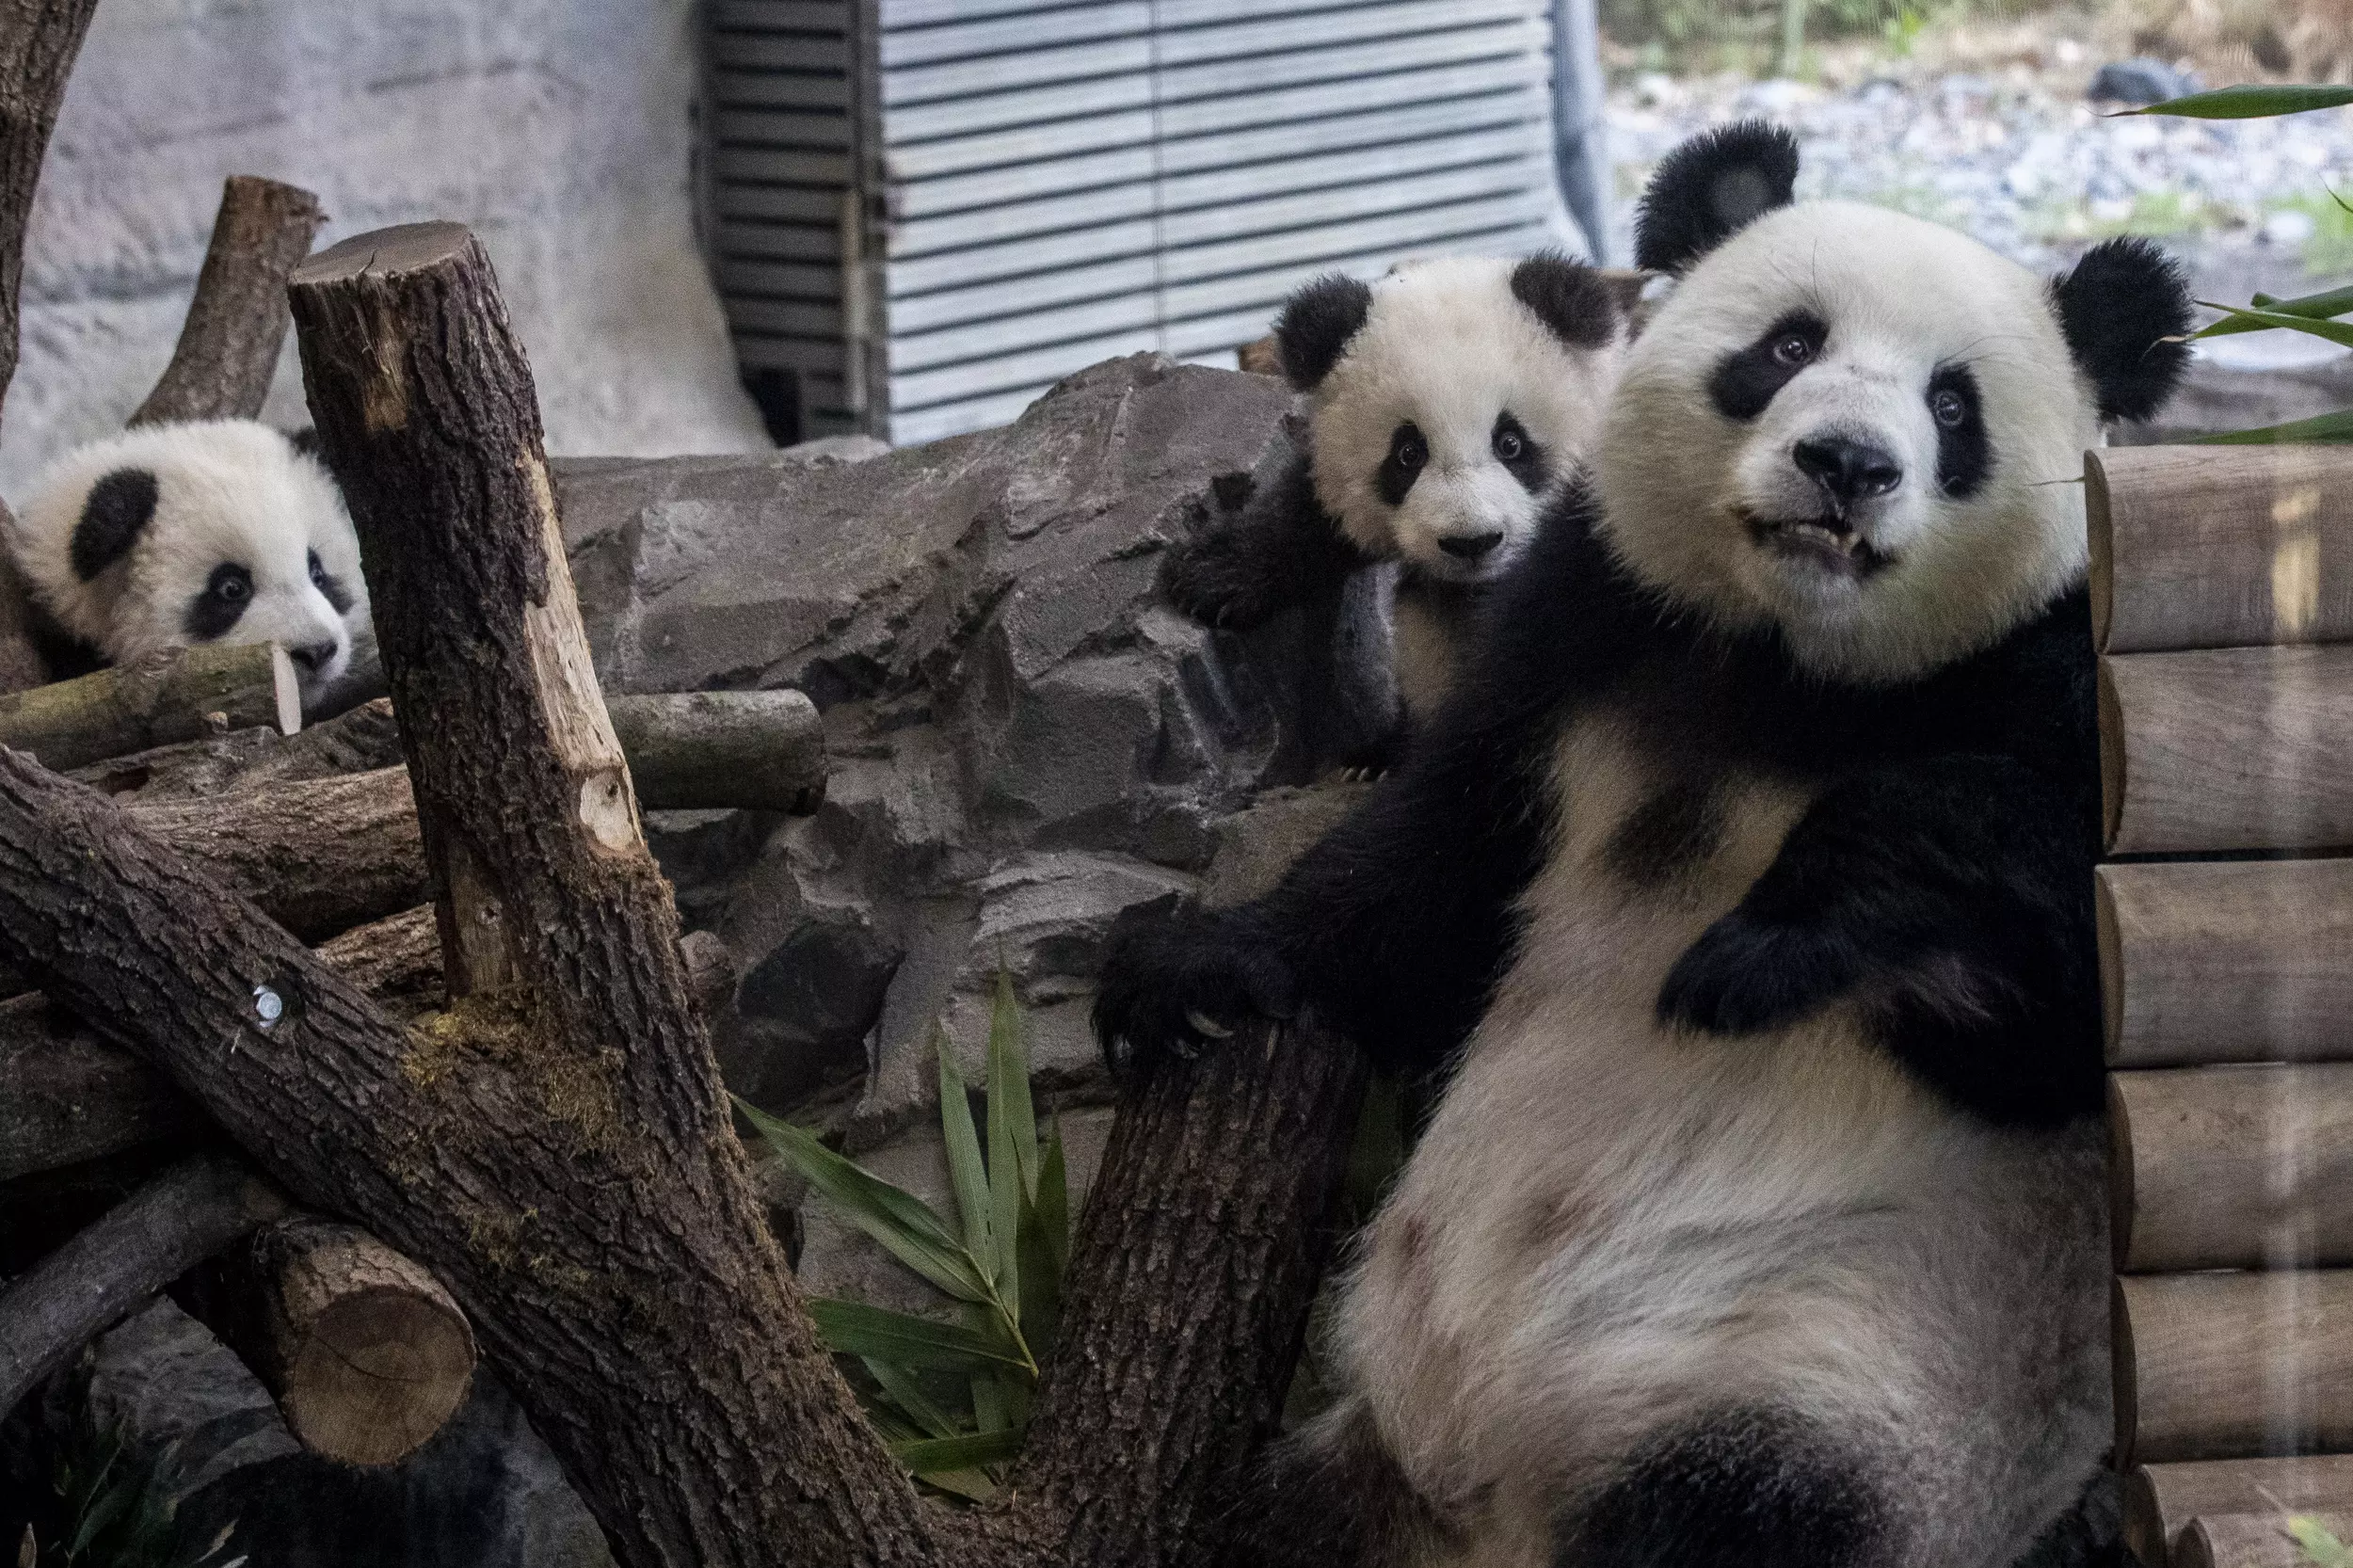 Celebrate National Giant Panda Day on March 16th, Nature and Wildlife